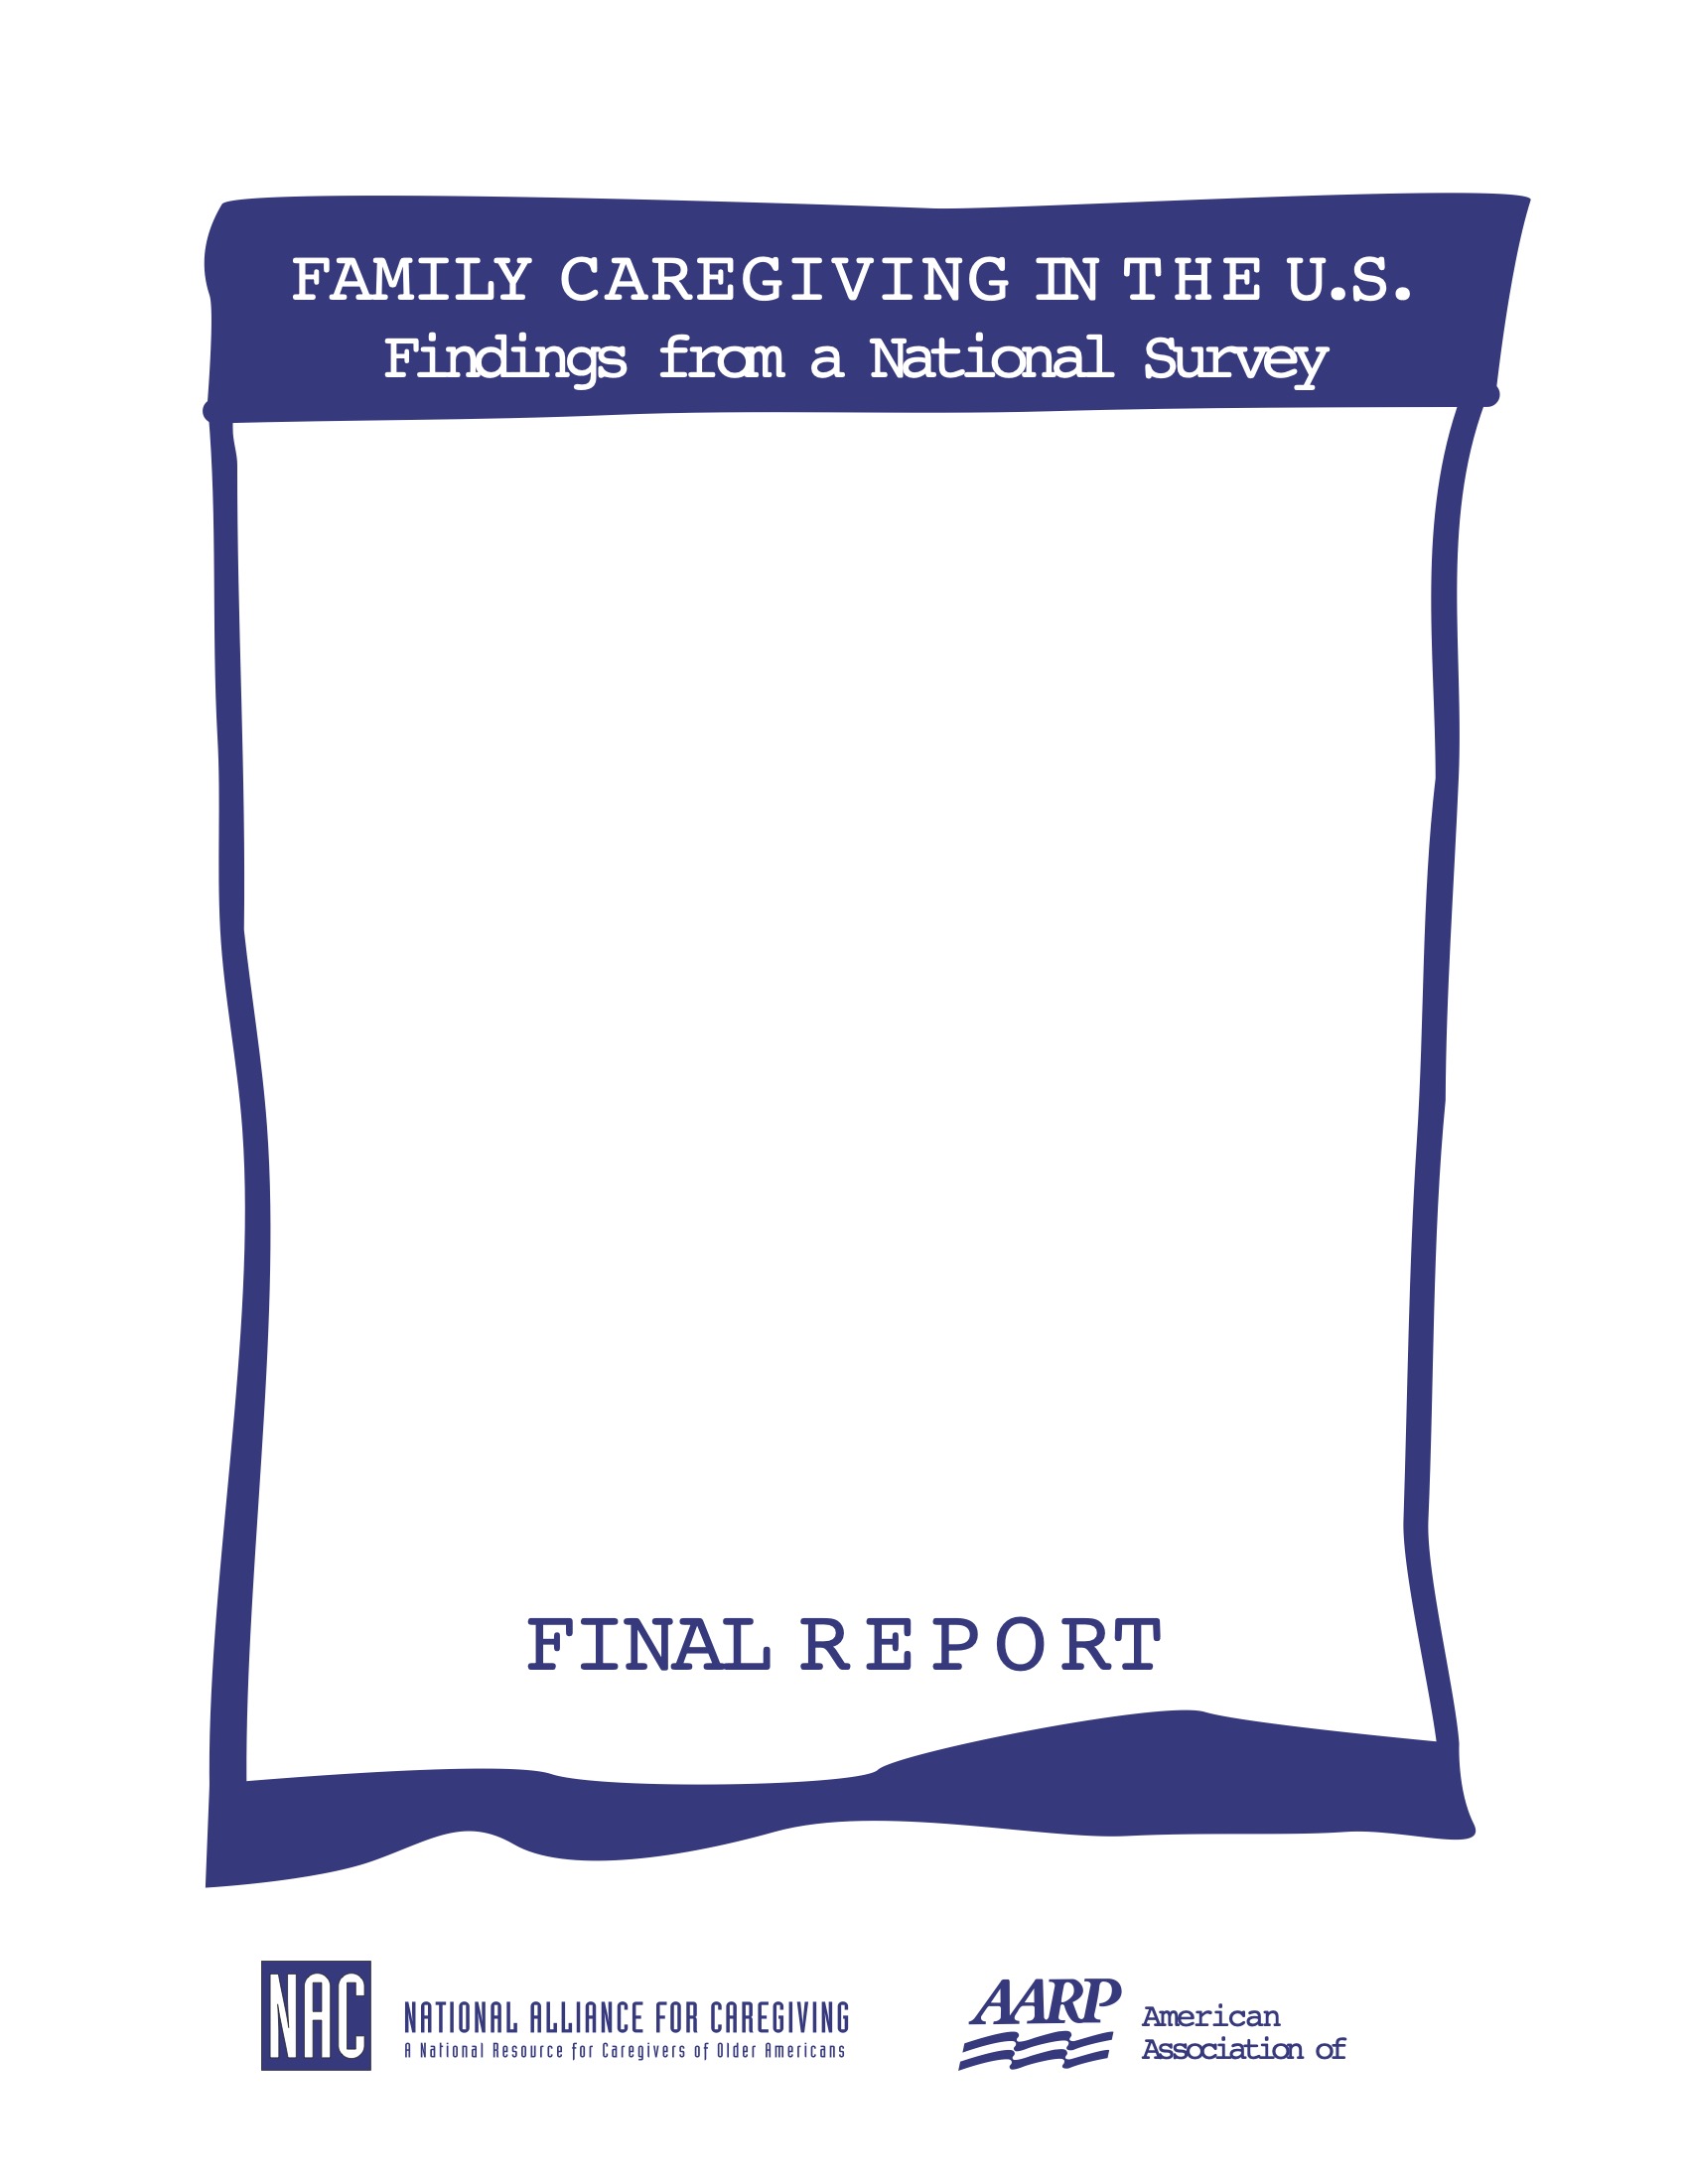 Caregiving in the US 1997 Cover Image